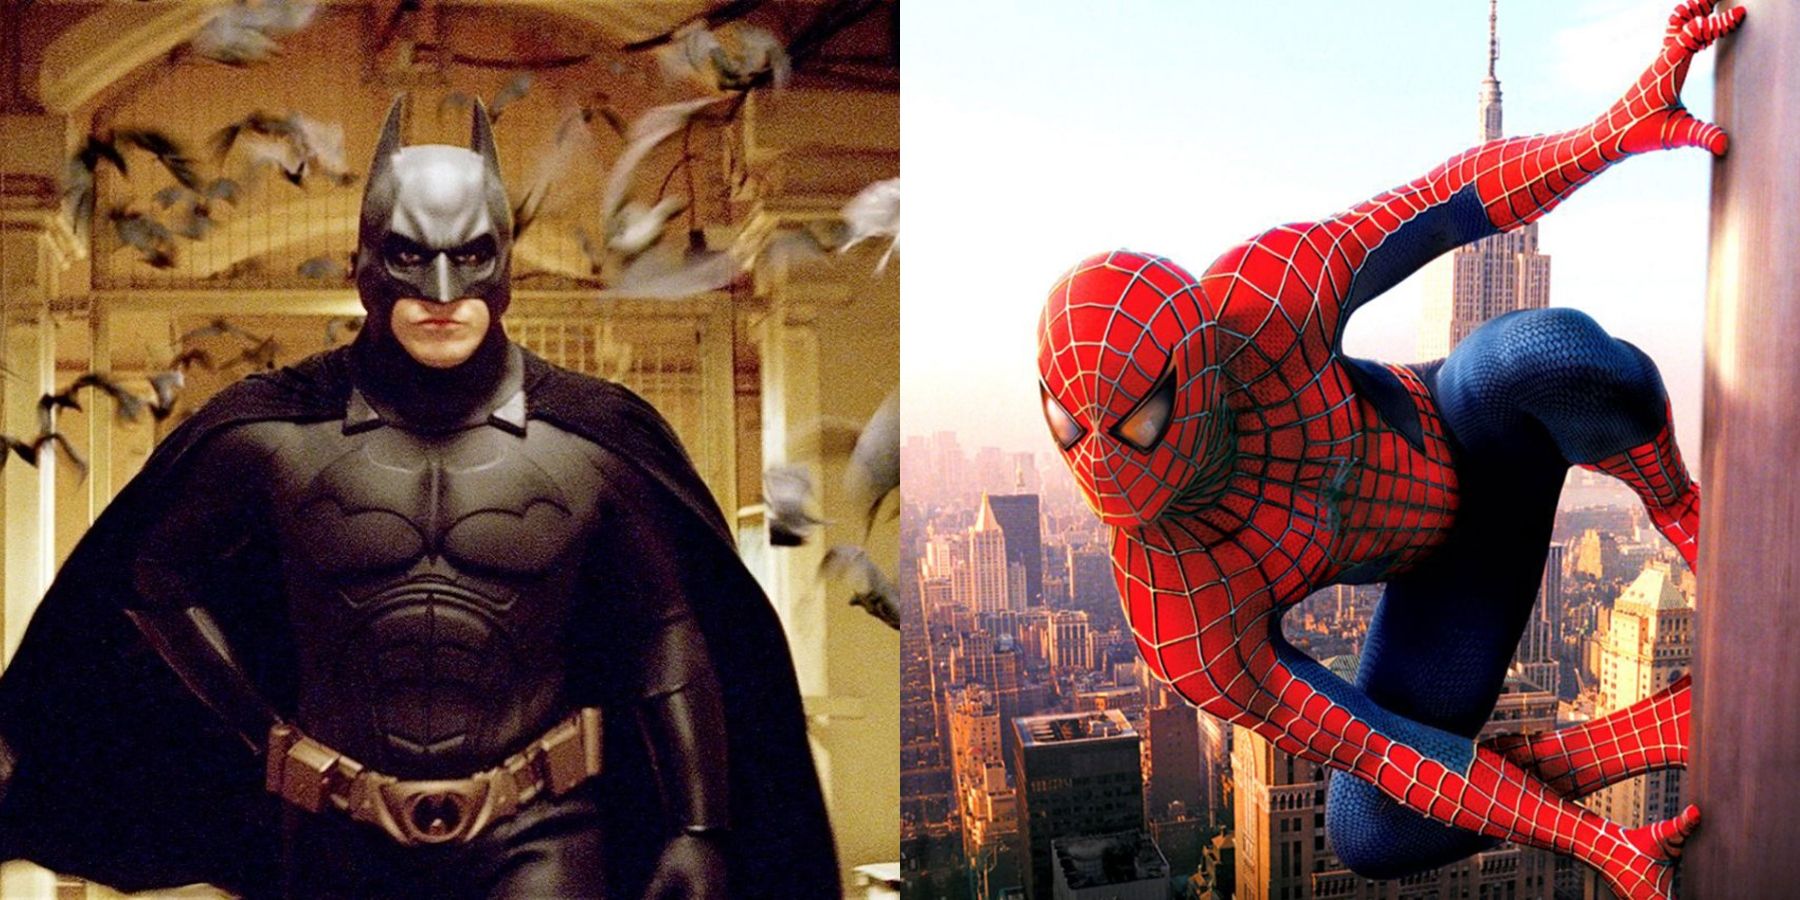 who is better spiderman or batman